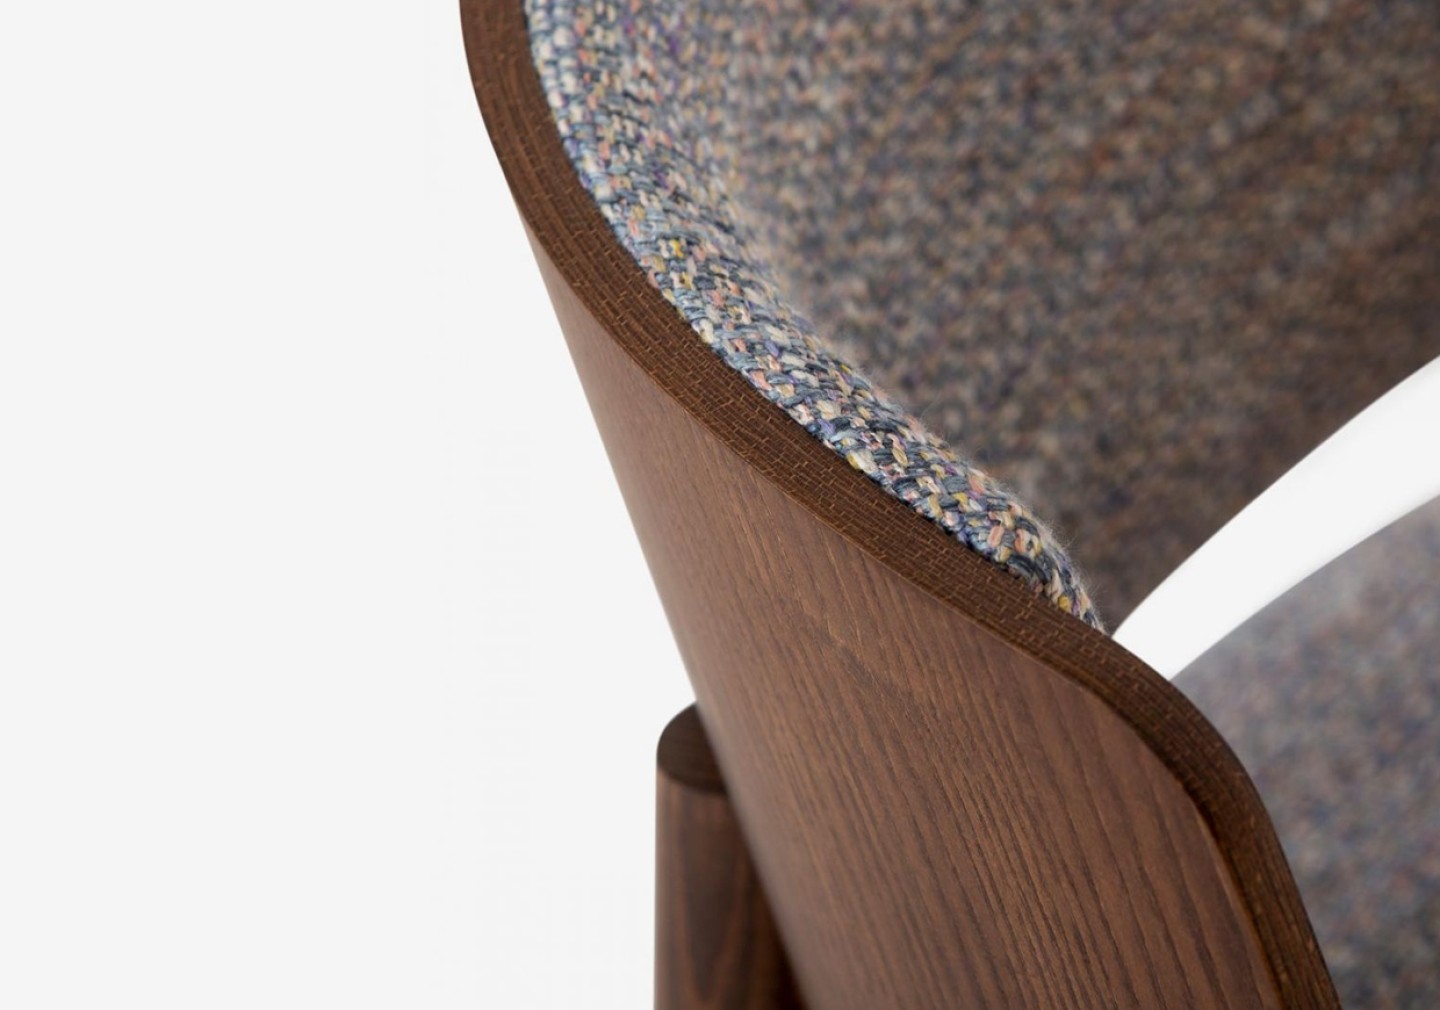 THE HALLA UP DINING CHAIR  by Lorenz+Kaz